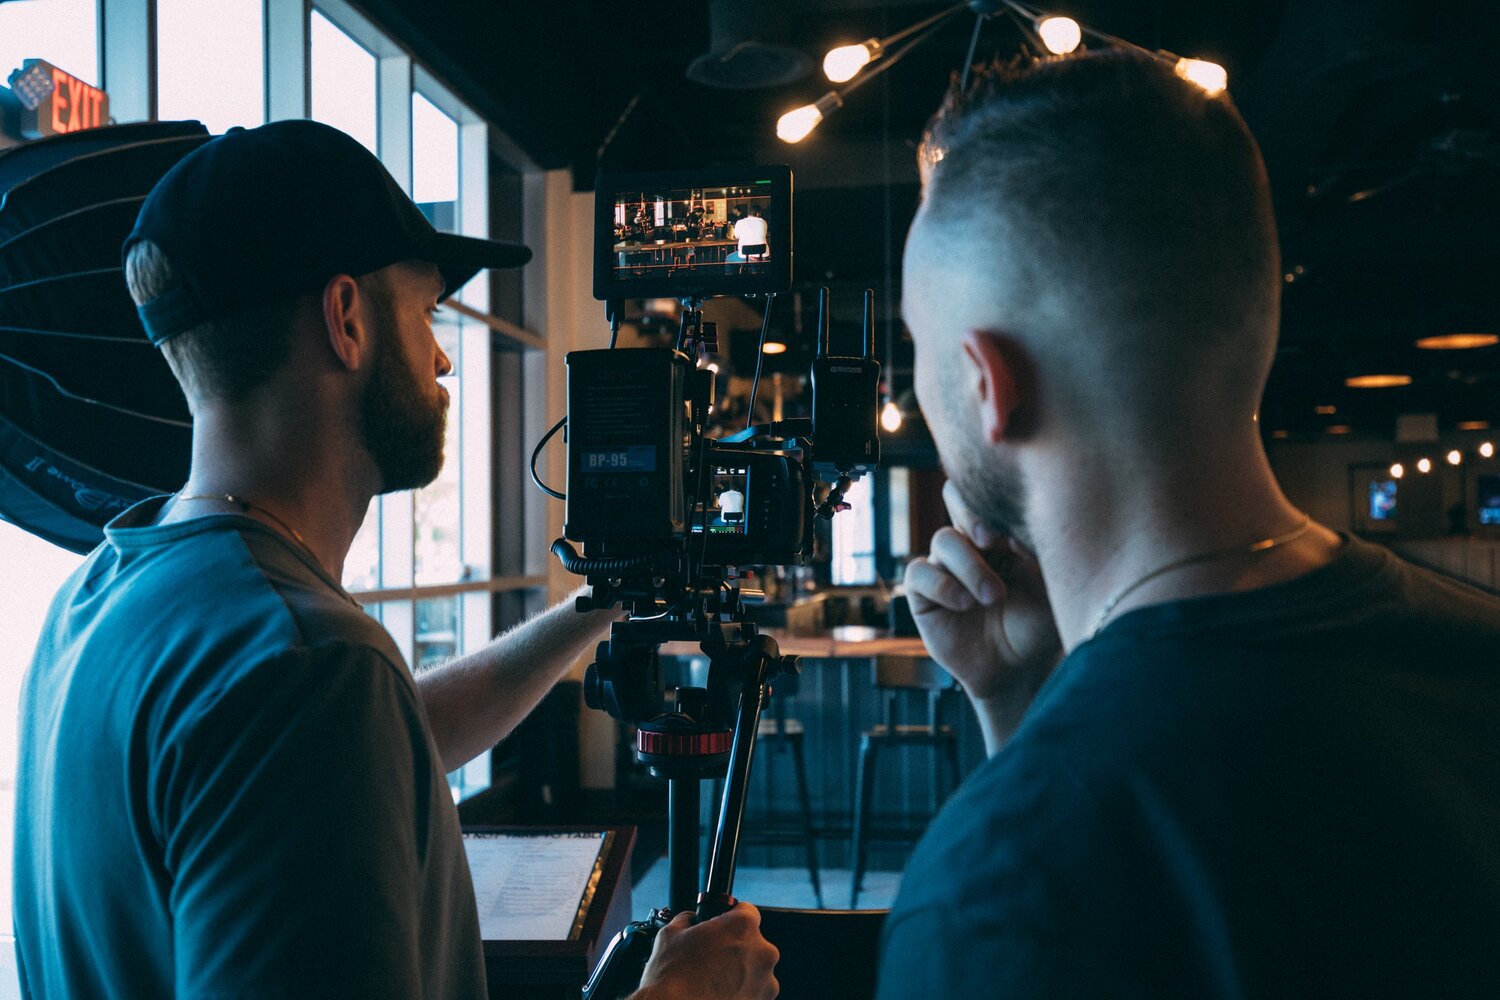 Why You Should Hire A Video Production Company